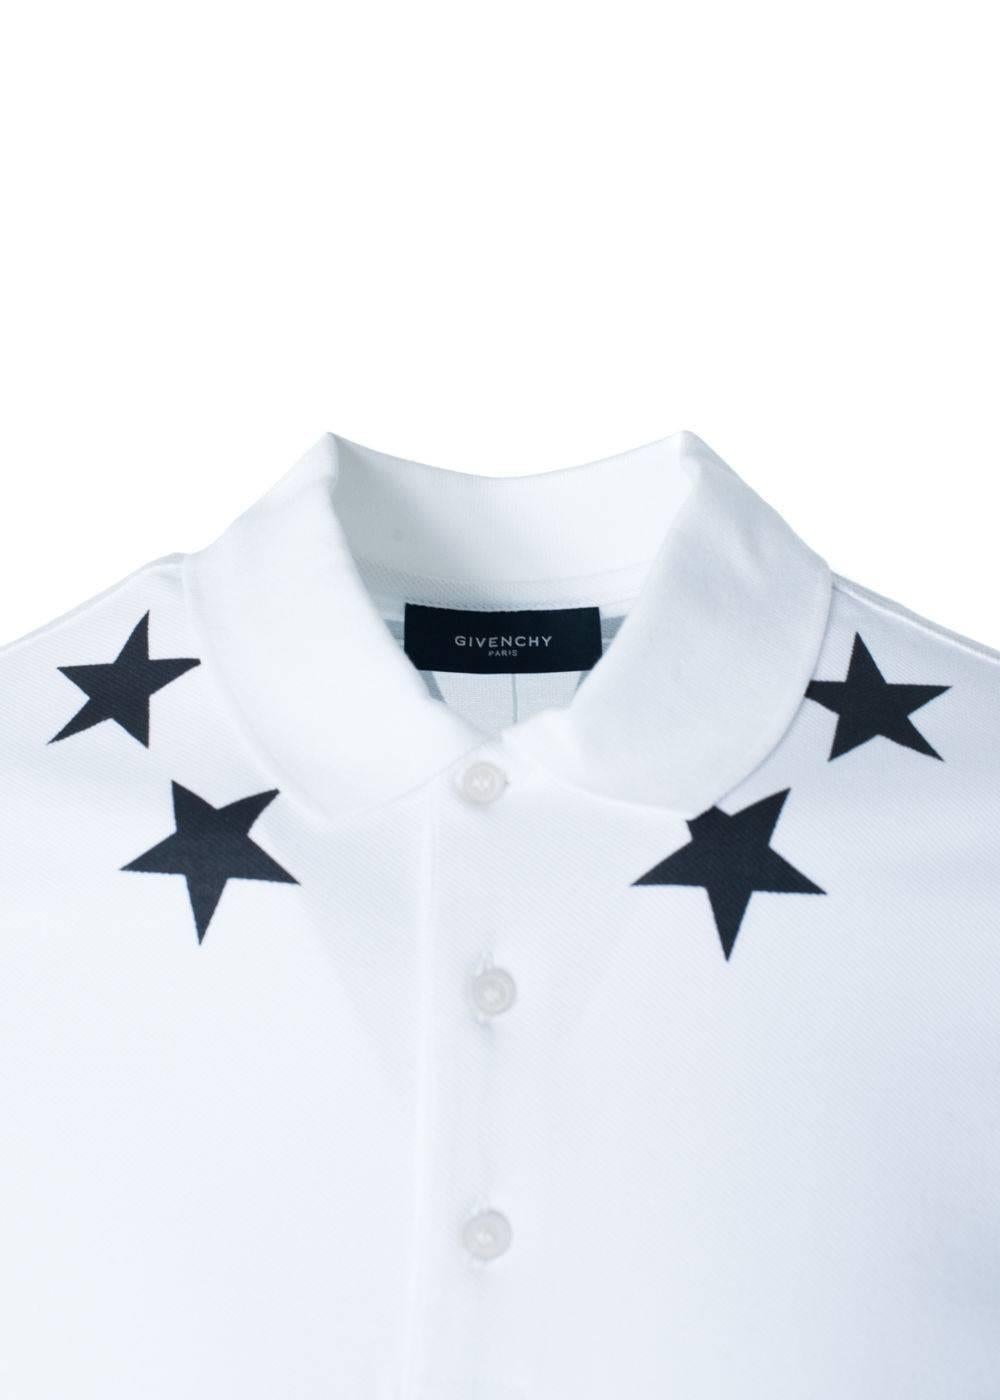 Brand New Givenchy Men's Polo
New in Bag with Original Tags
Retails in Stores & Online for $550
Men's Size XXL Fits True to Size

Givenchy's 100% cotton polo top with star embroideries throughout the shirt. The textiles are perfect for any season